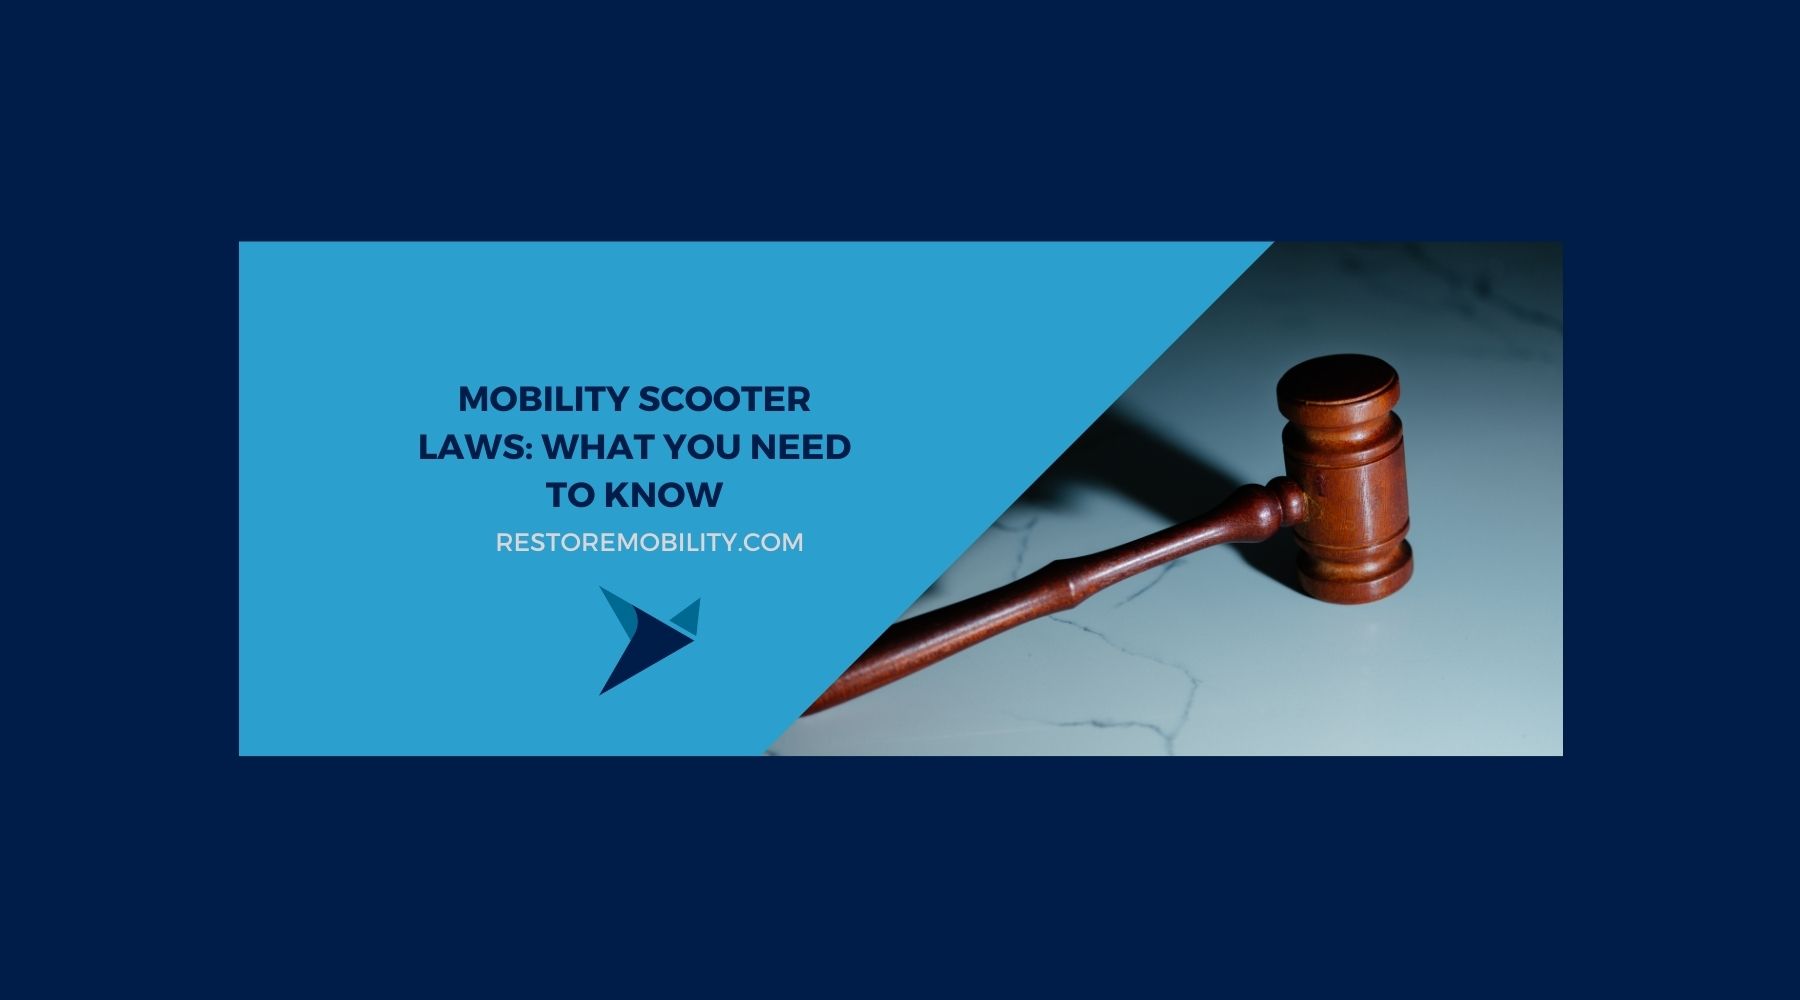 Mobility Scooter Laws: What You Need to Know